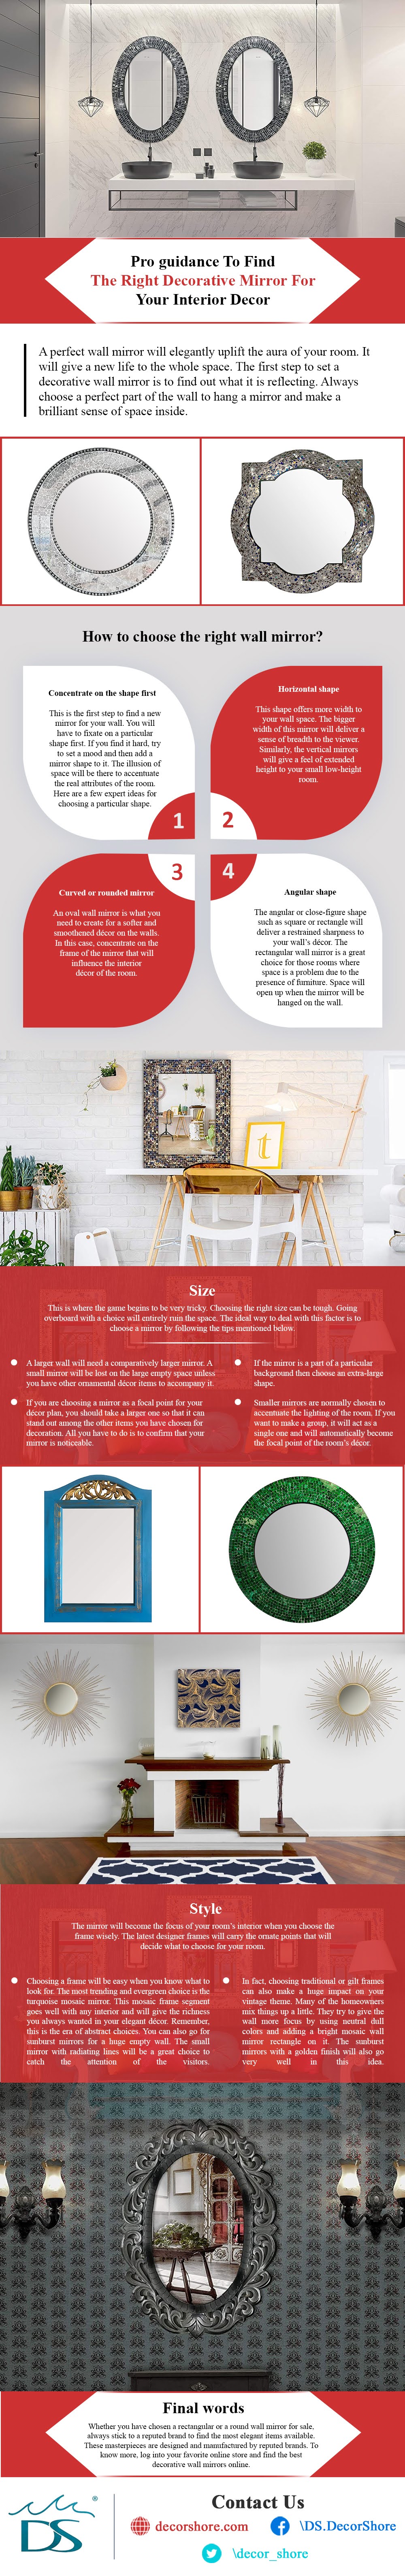 pro-guidance-to-find-the-right-decorative-mirror-for-your-interior-decor-infographic